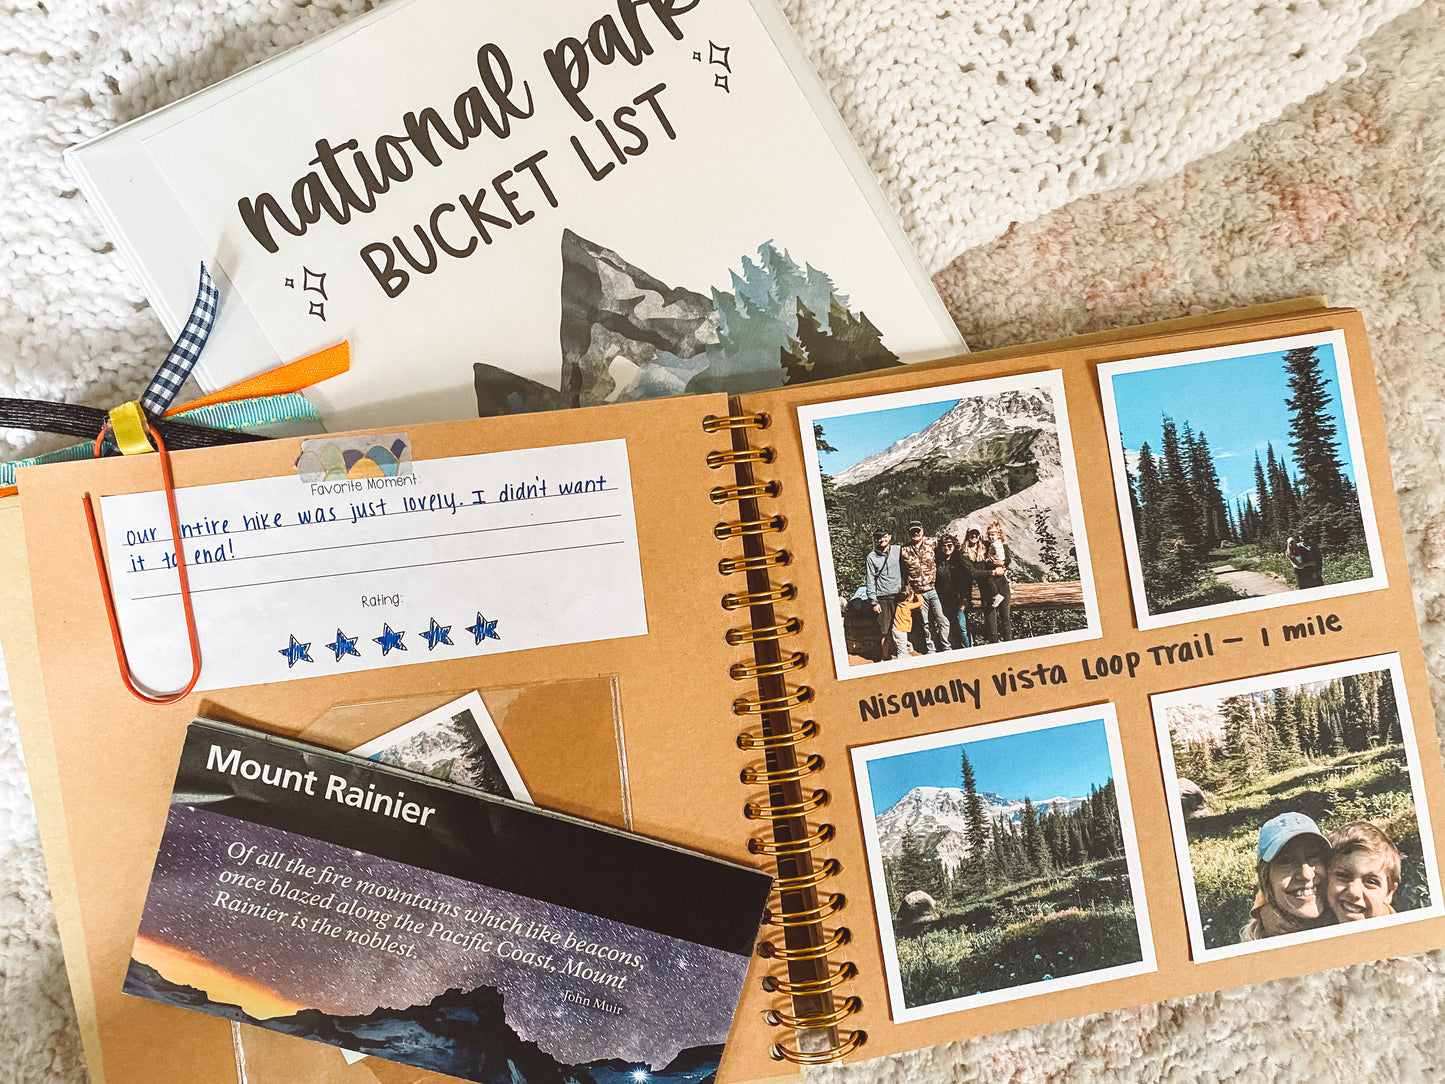 Interior page of scrapbook shows square photos of National Park trip pasted on one page. A plastic pocket with a Mount Rainier map and part of the National Parks printable with the rating is pasted on the other side.